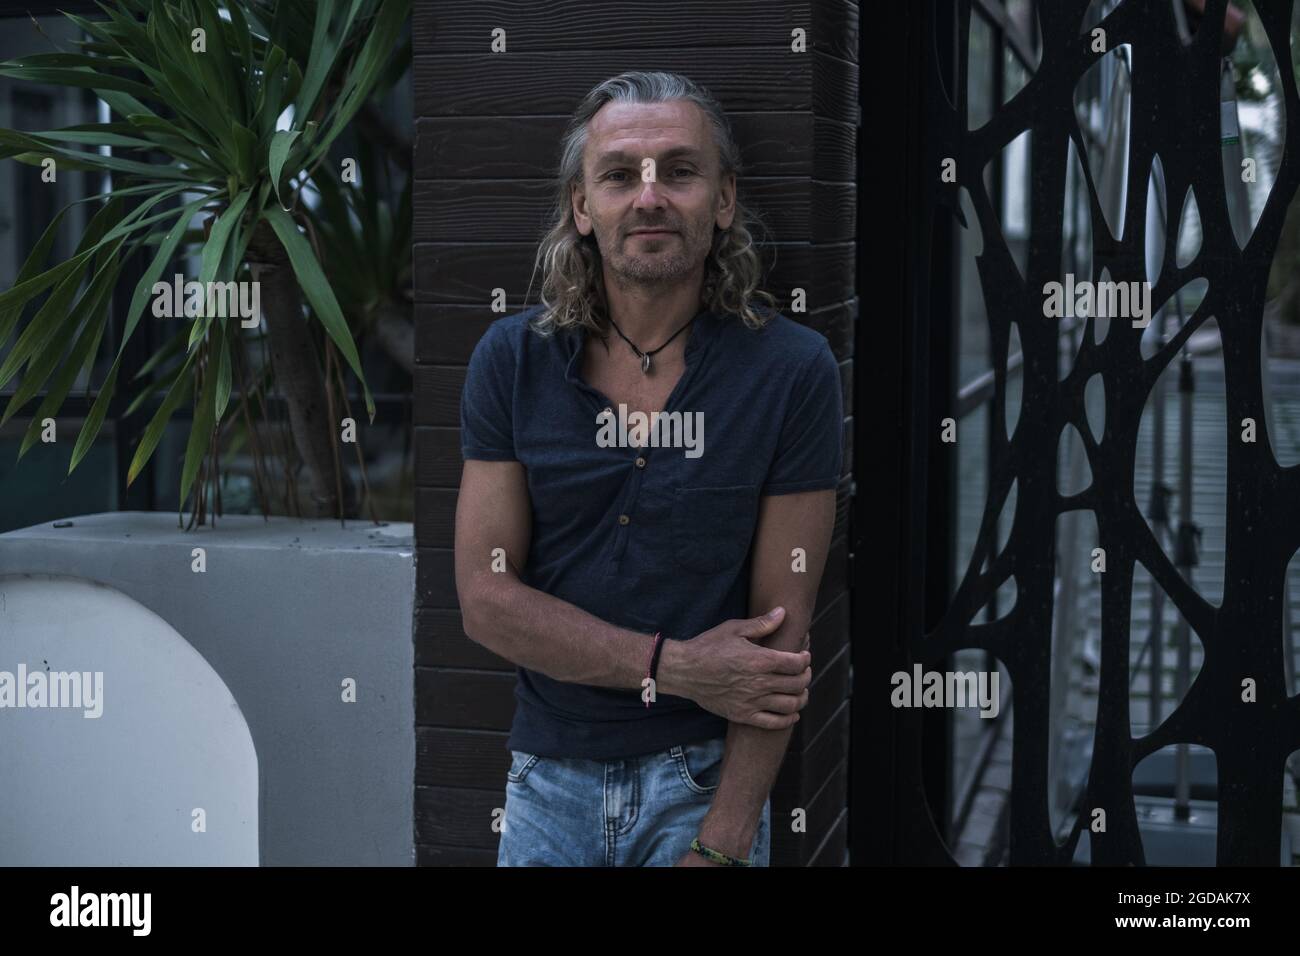 Tanned mature handsome man in t-shirt and jeans standing on the street. Long grey hair. Portrait. Grunge style. Looking at camera with copy space. Stock Photo